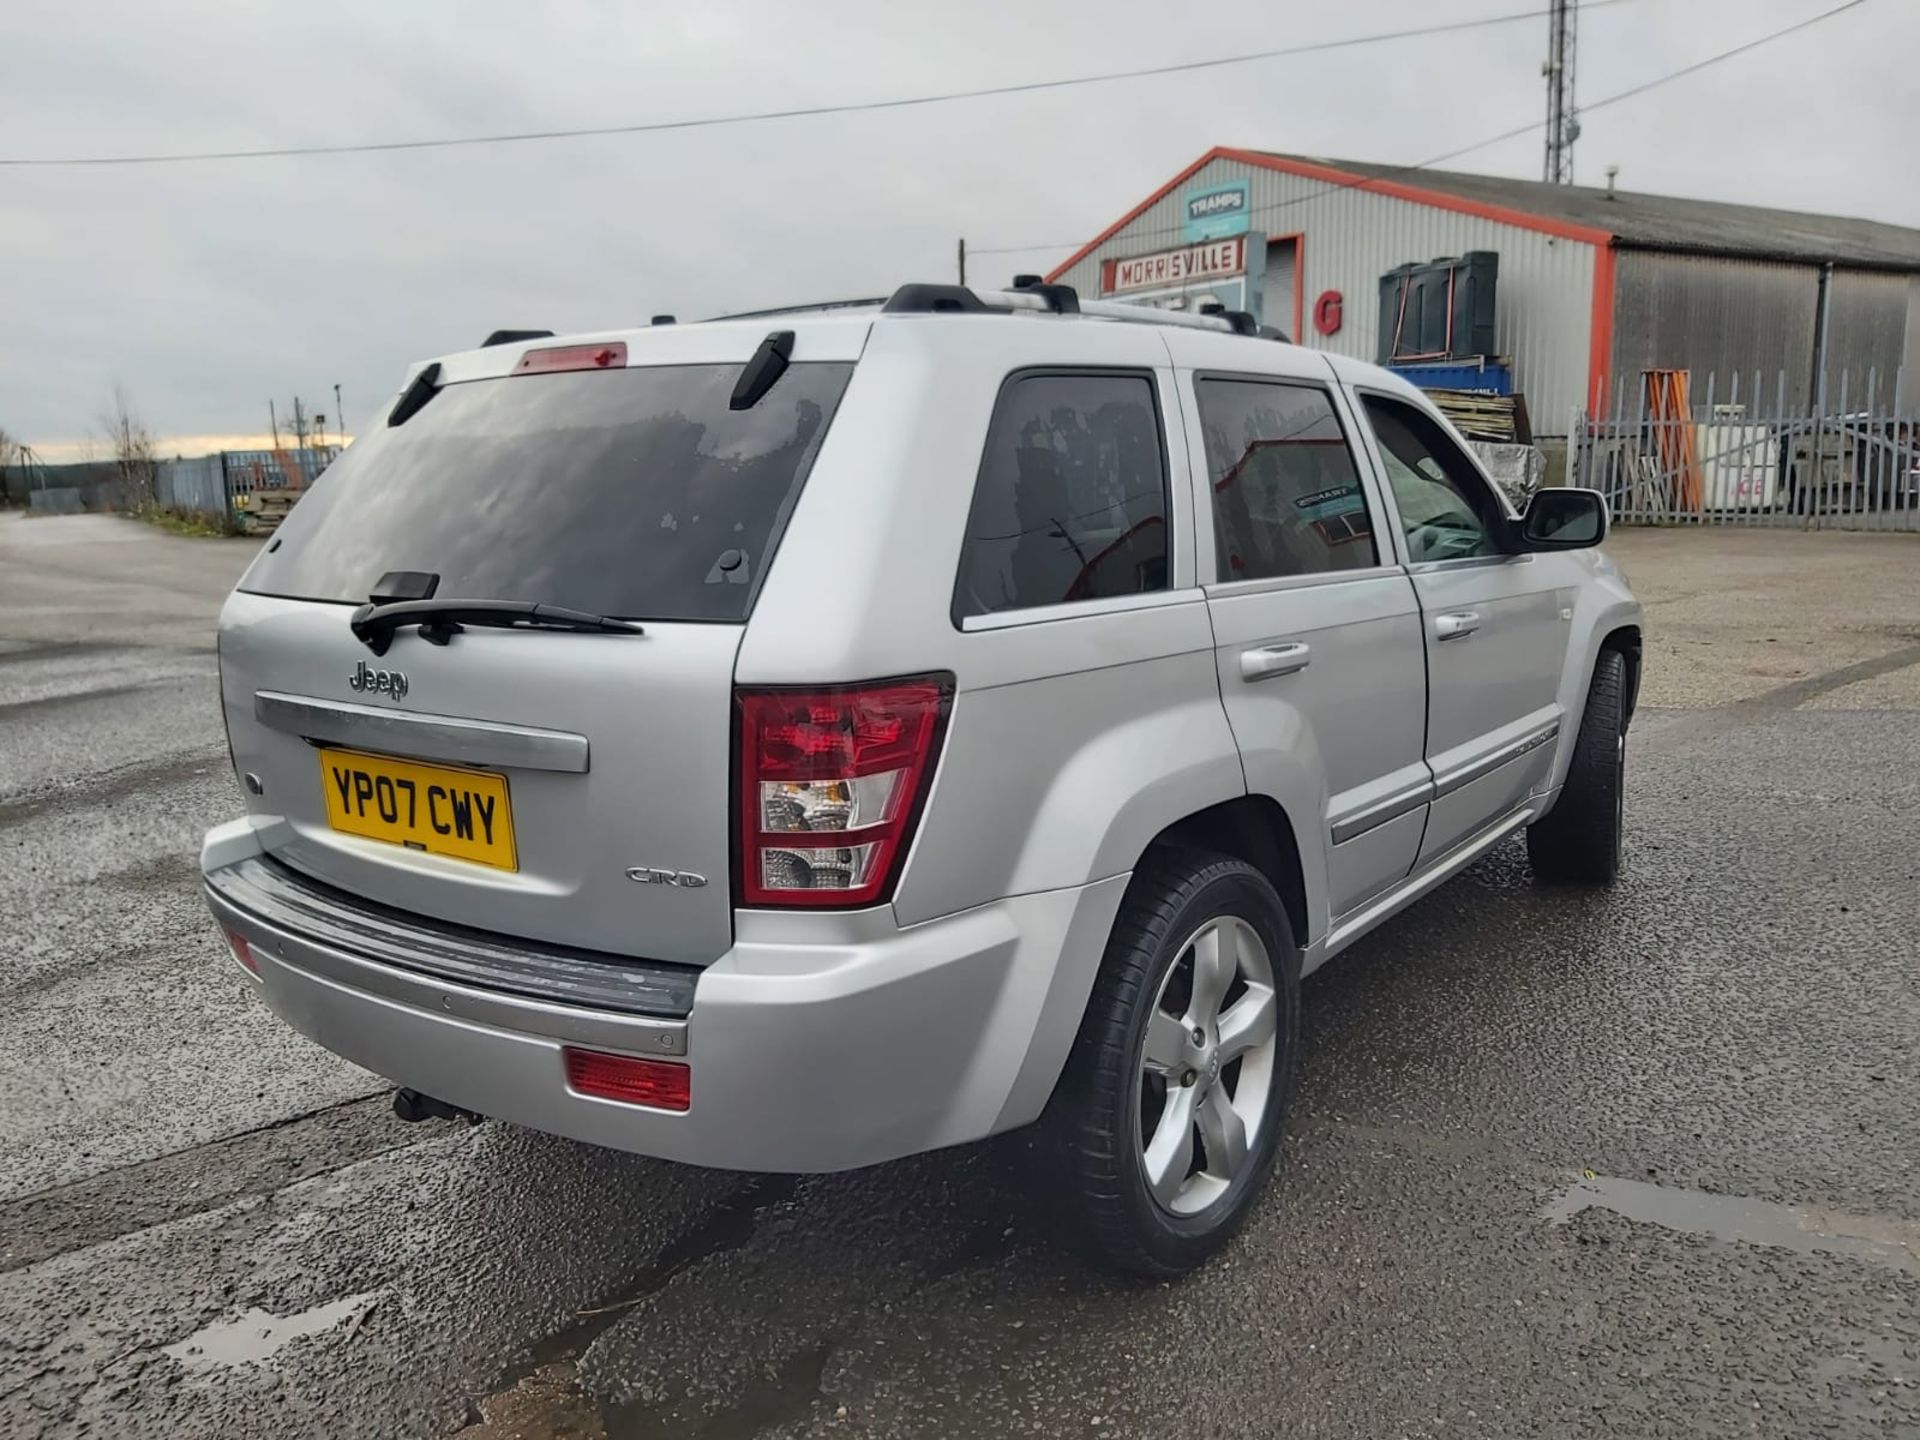 2007 JEEP G-CHEROKEE OVERLAND CRD A SILVER SUV ESTATE *NO VAT* - Image 8 of 17